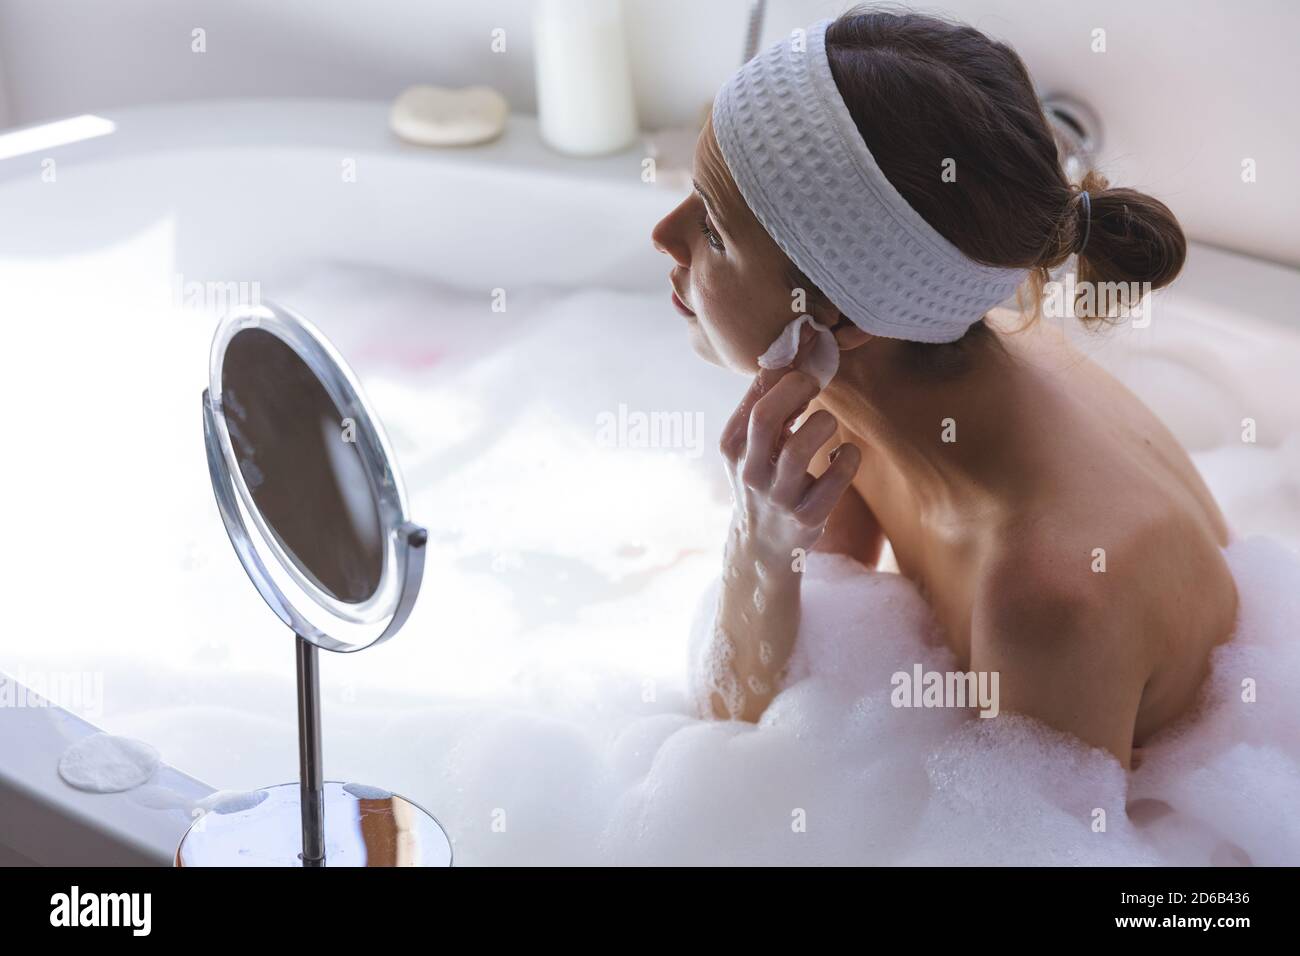 Woman cleansing her face with cotton pad while sitting in bathtub Stock Photo